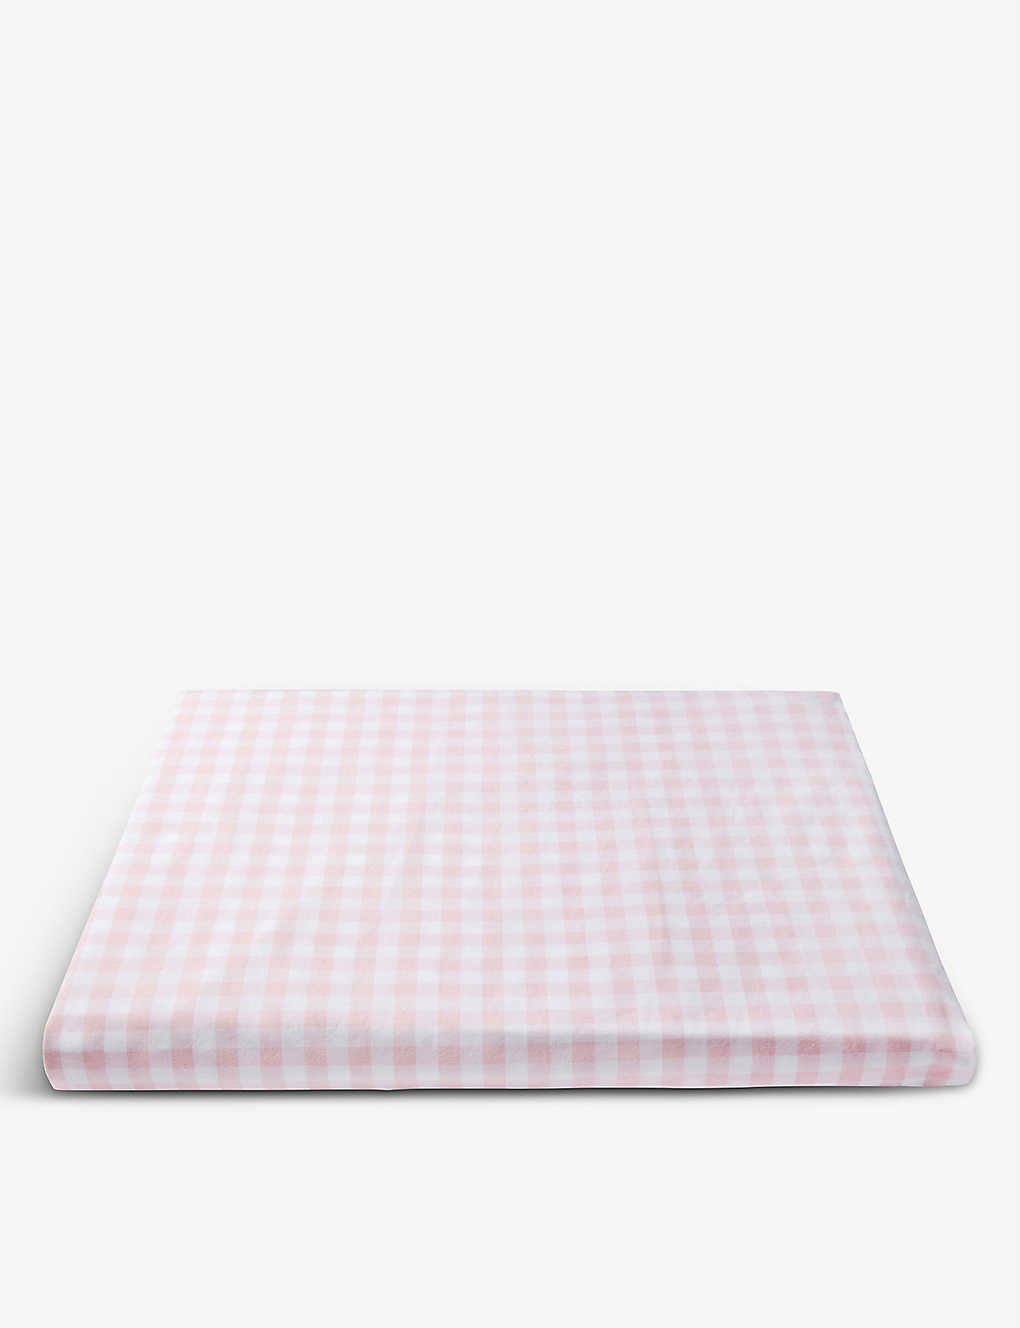 The Little White Company Pink Gingham Cotton Double Fitted Sheet 190x140cm